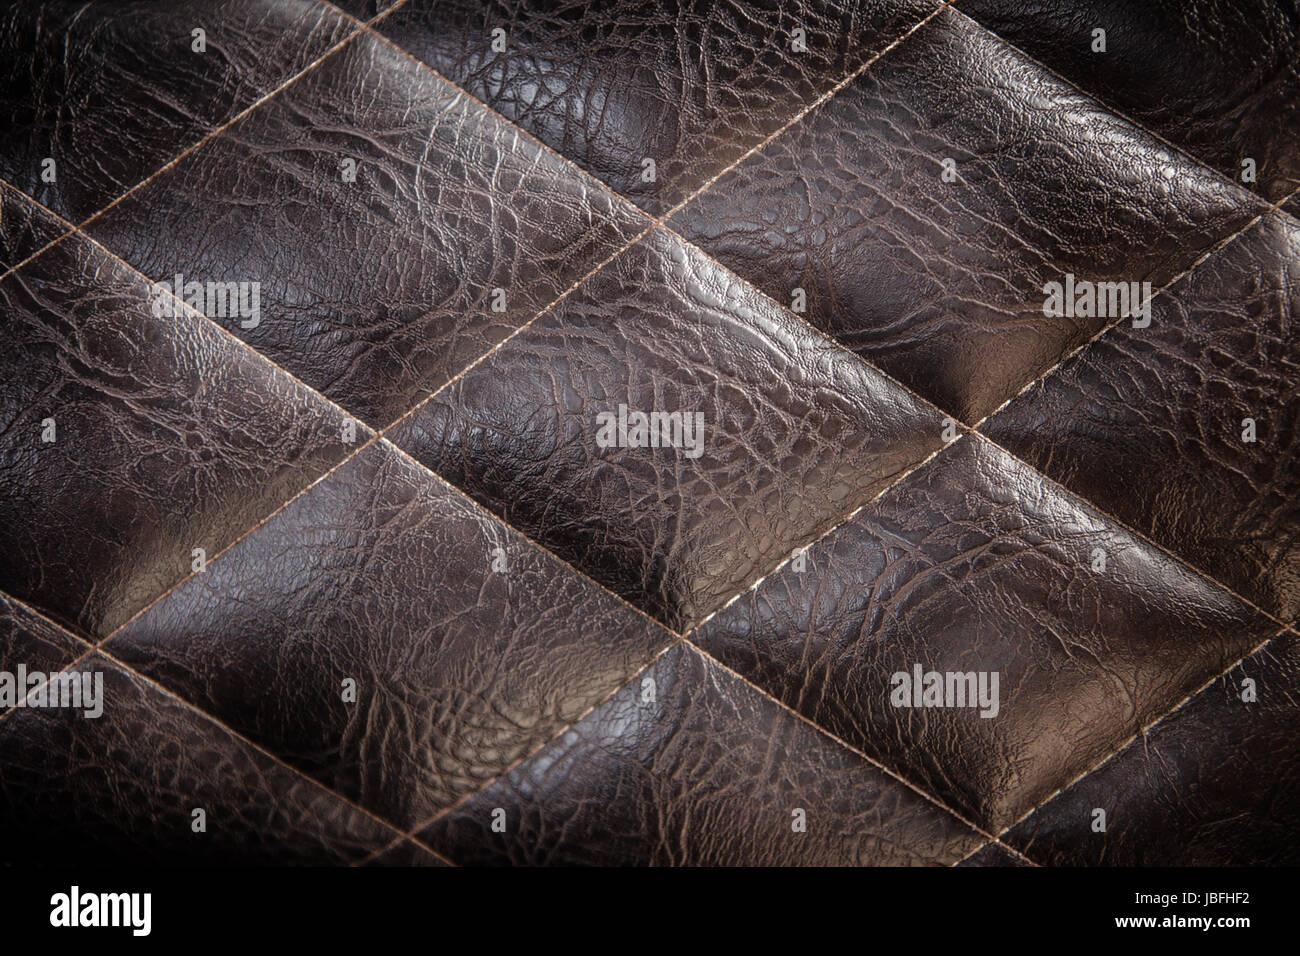 background image filling the frame with  a leather texture pattern Stock Photo